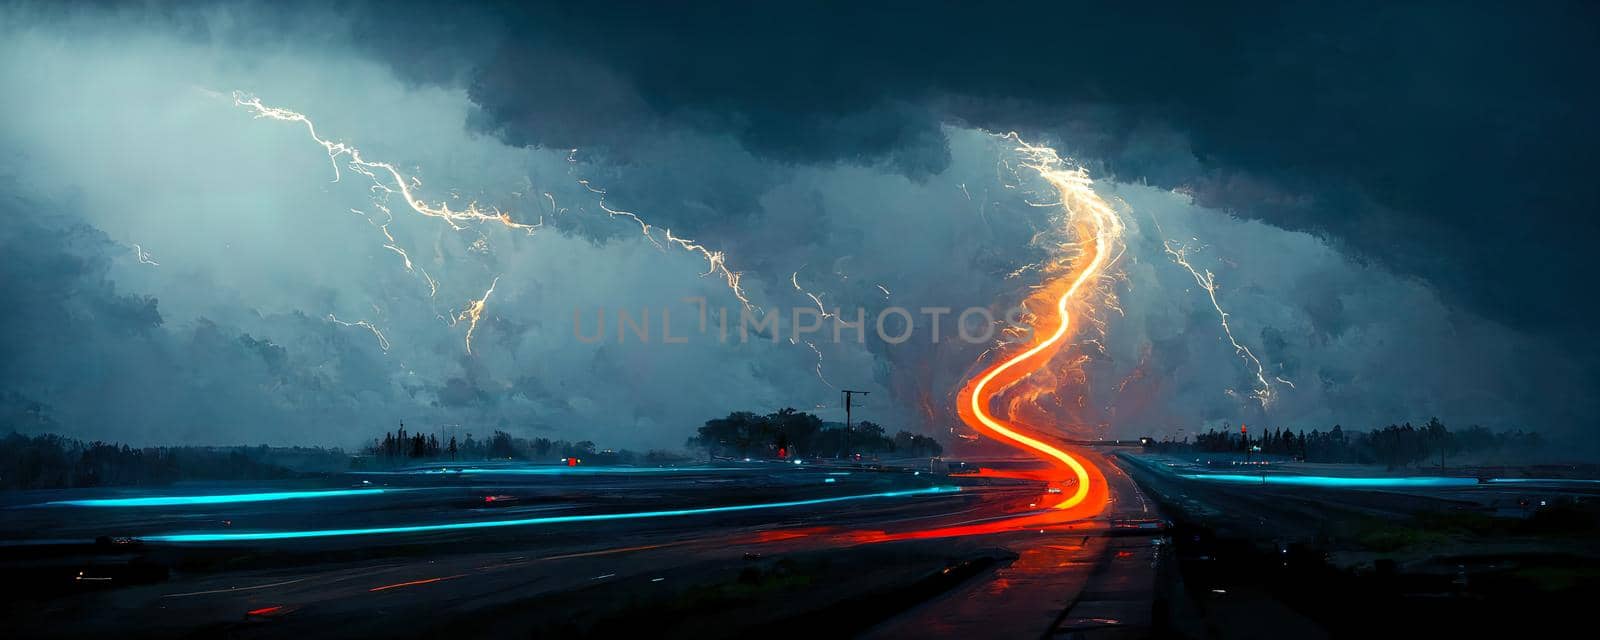 abstract illustration of huge lightning in the night sky Over the road during the rain.